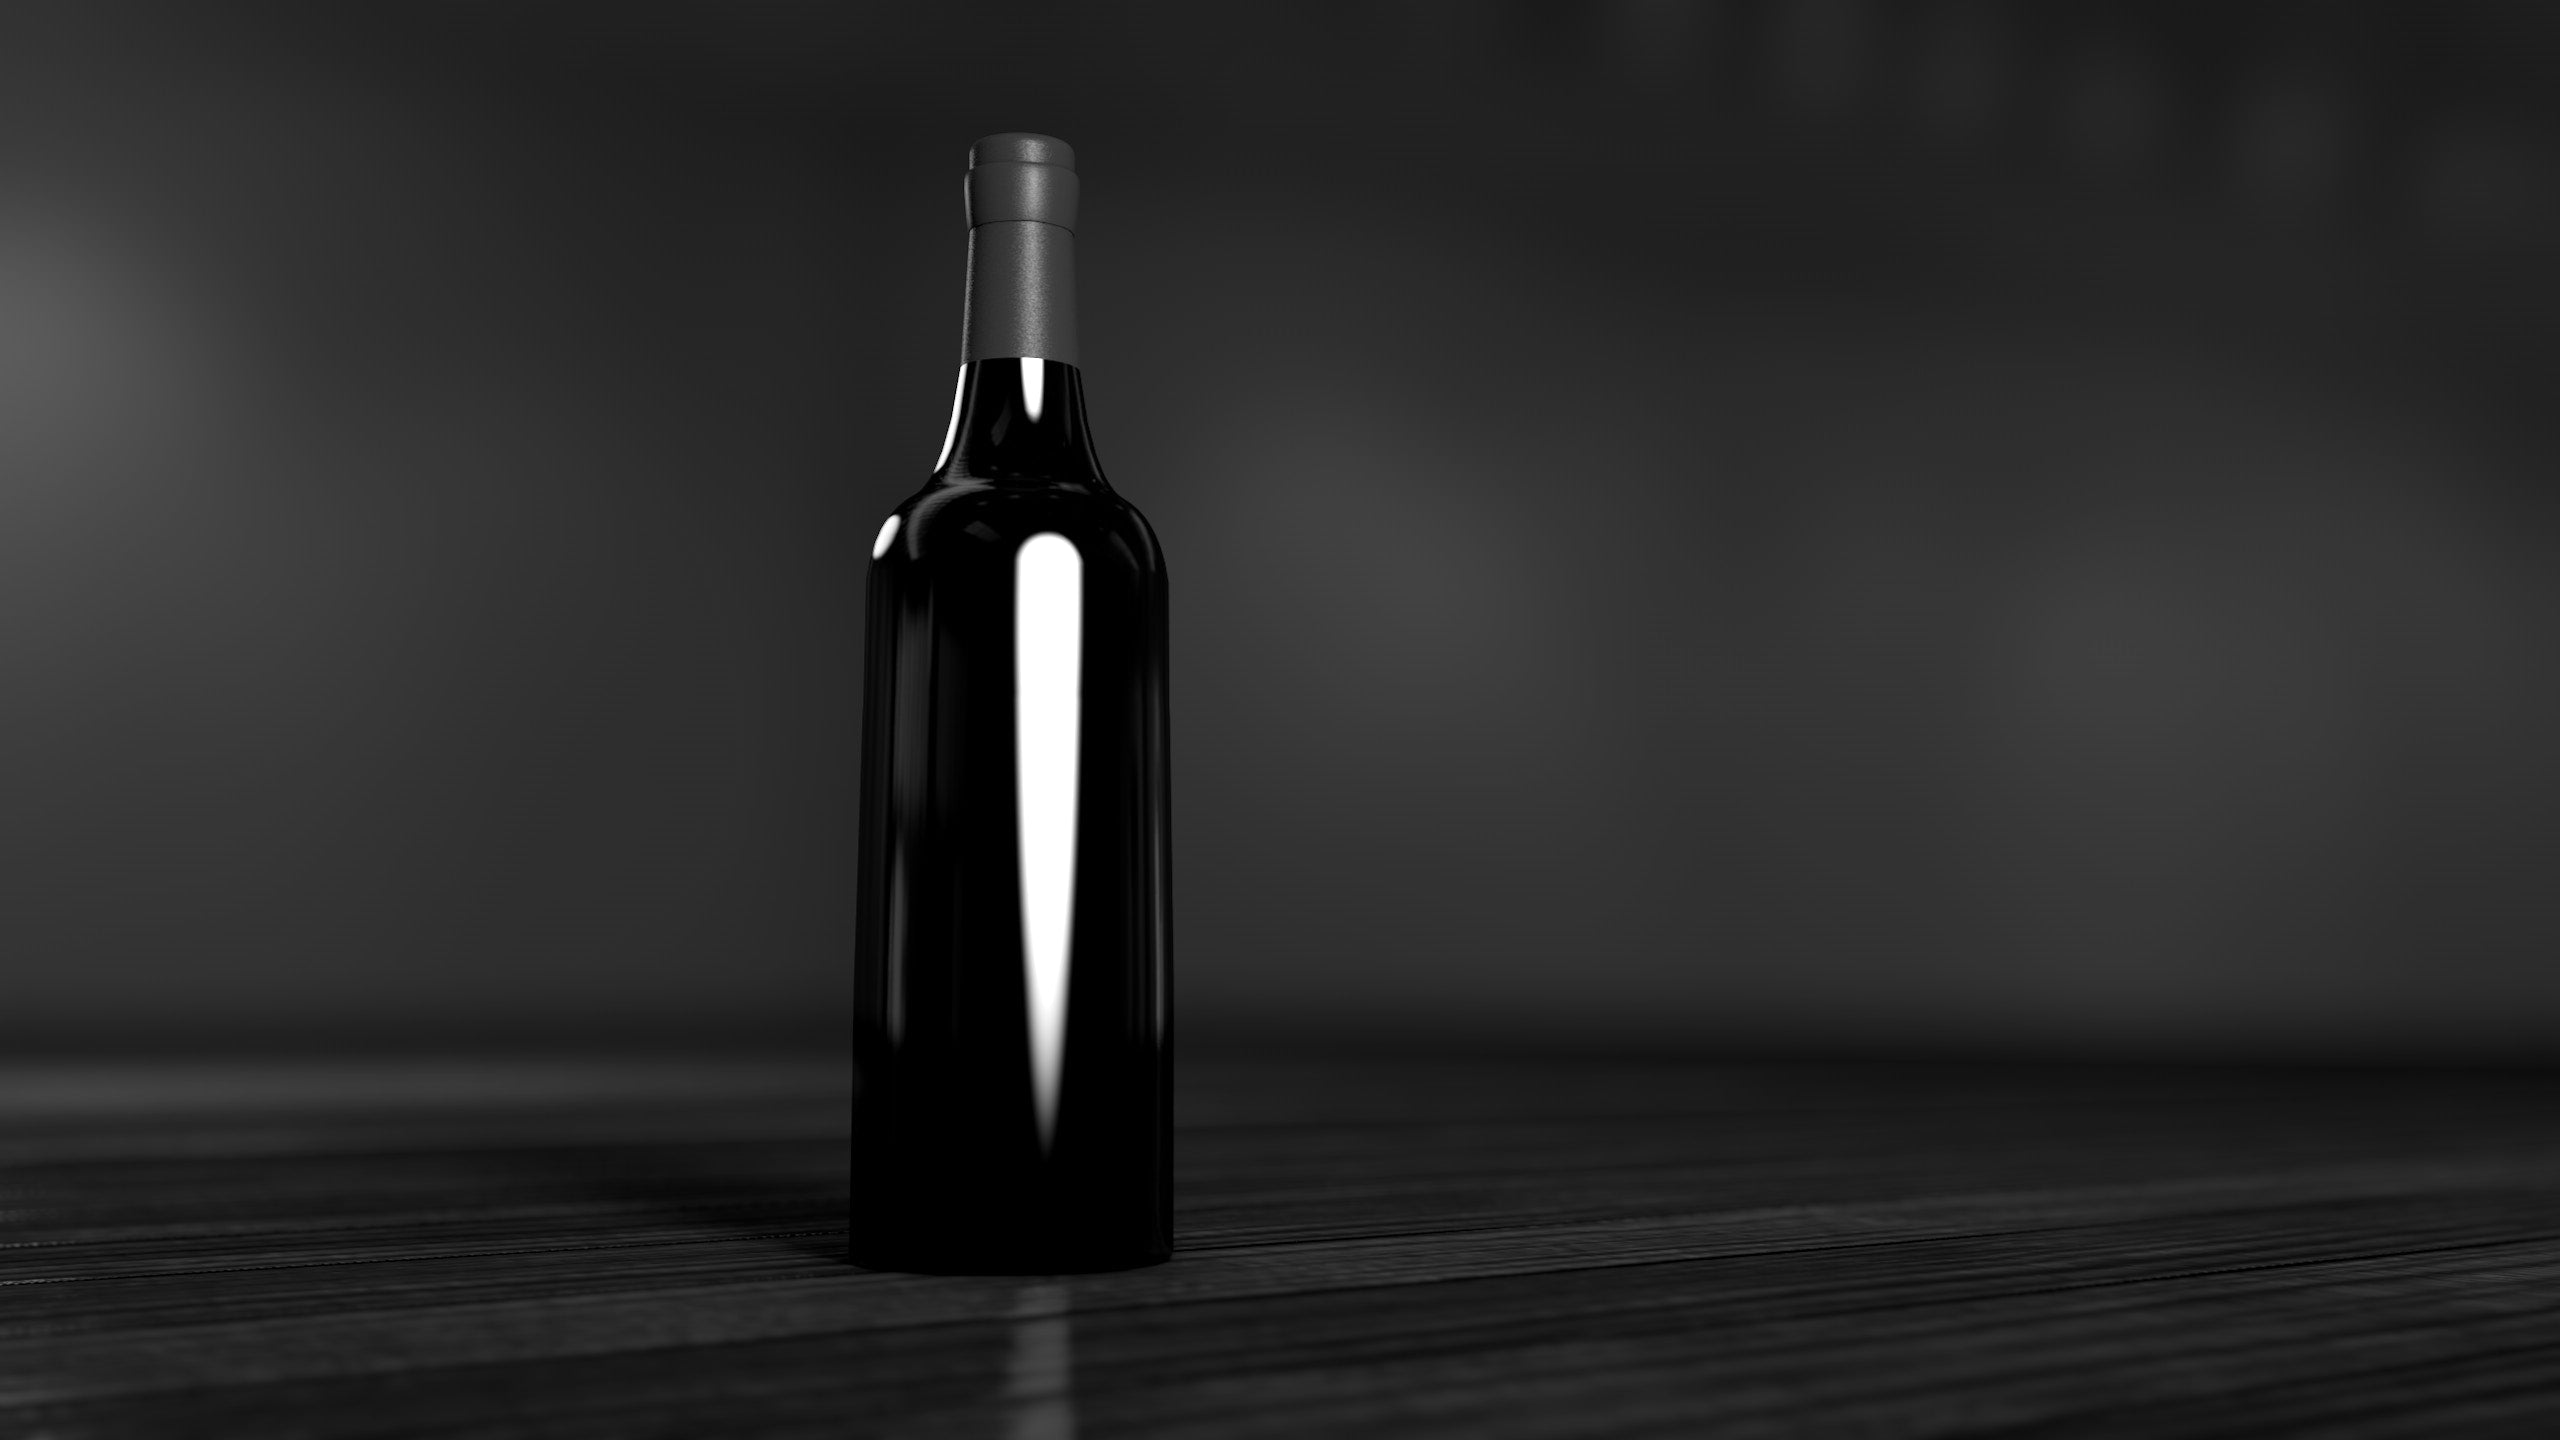 Blank Wine Bottle Without Label